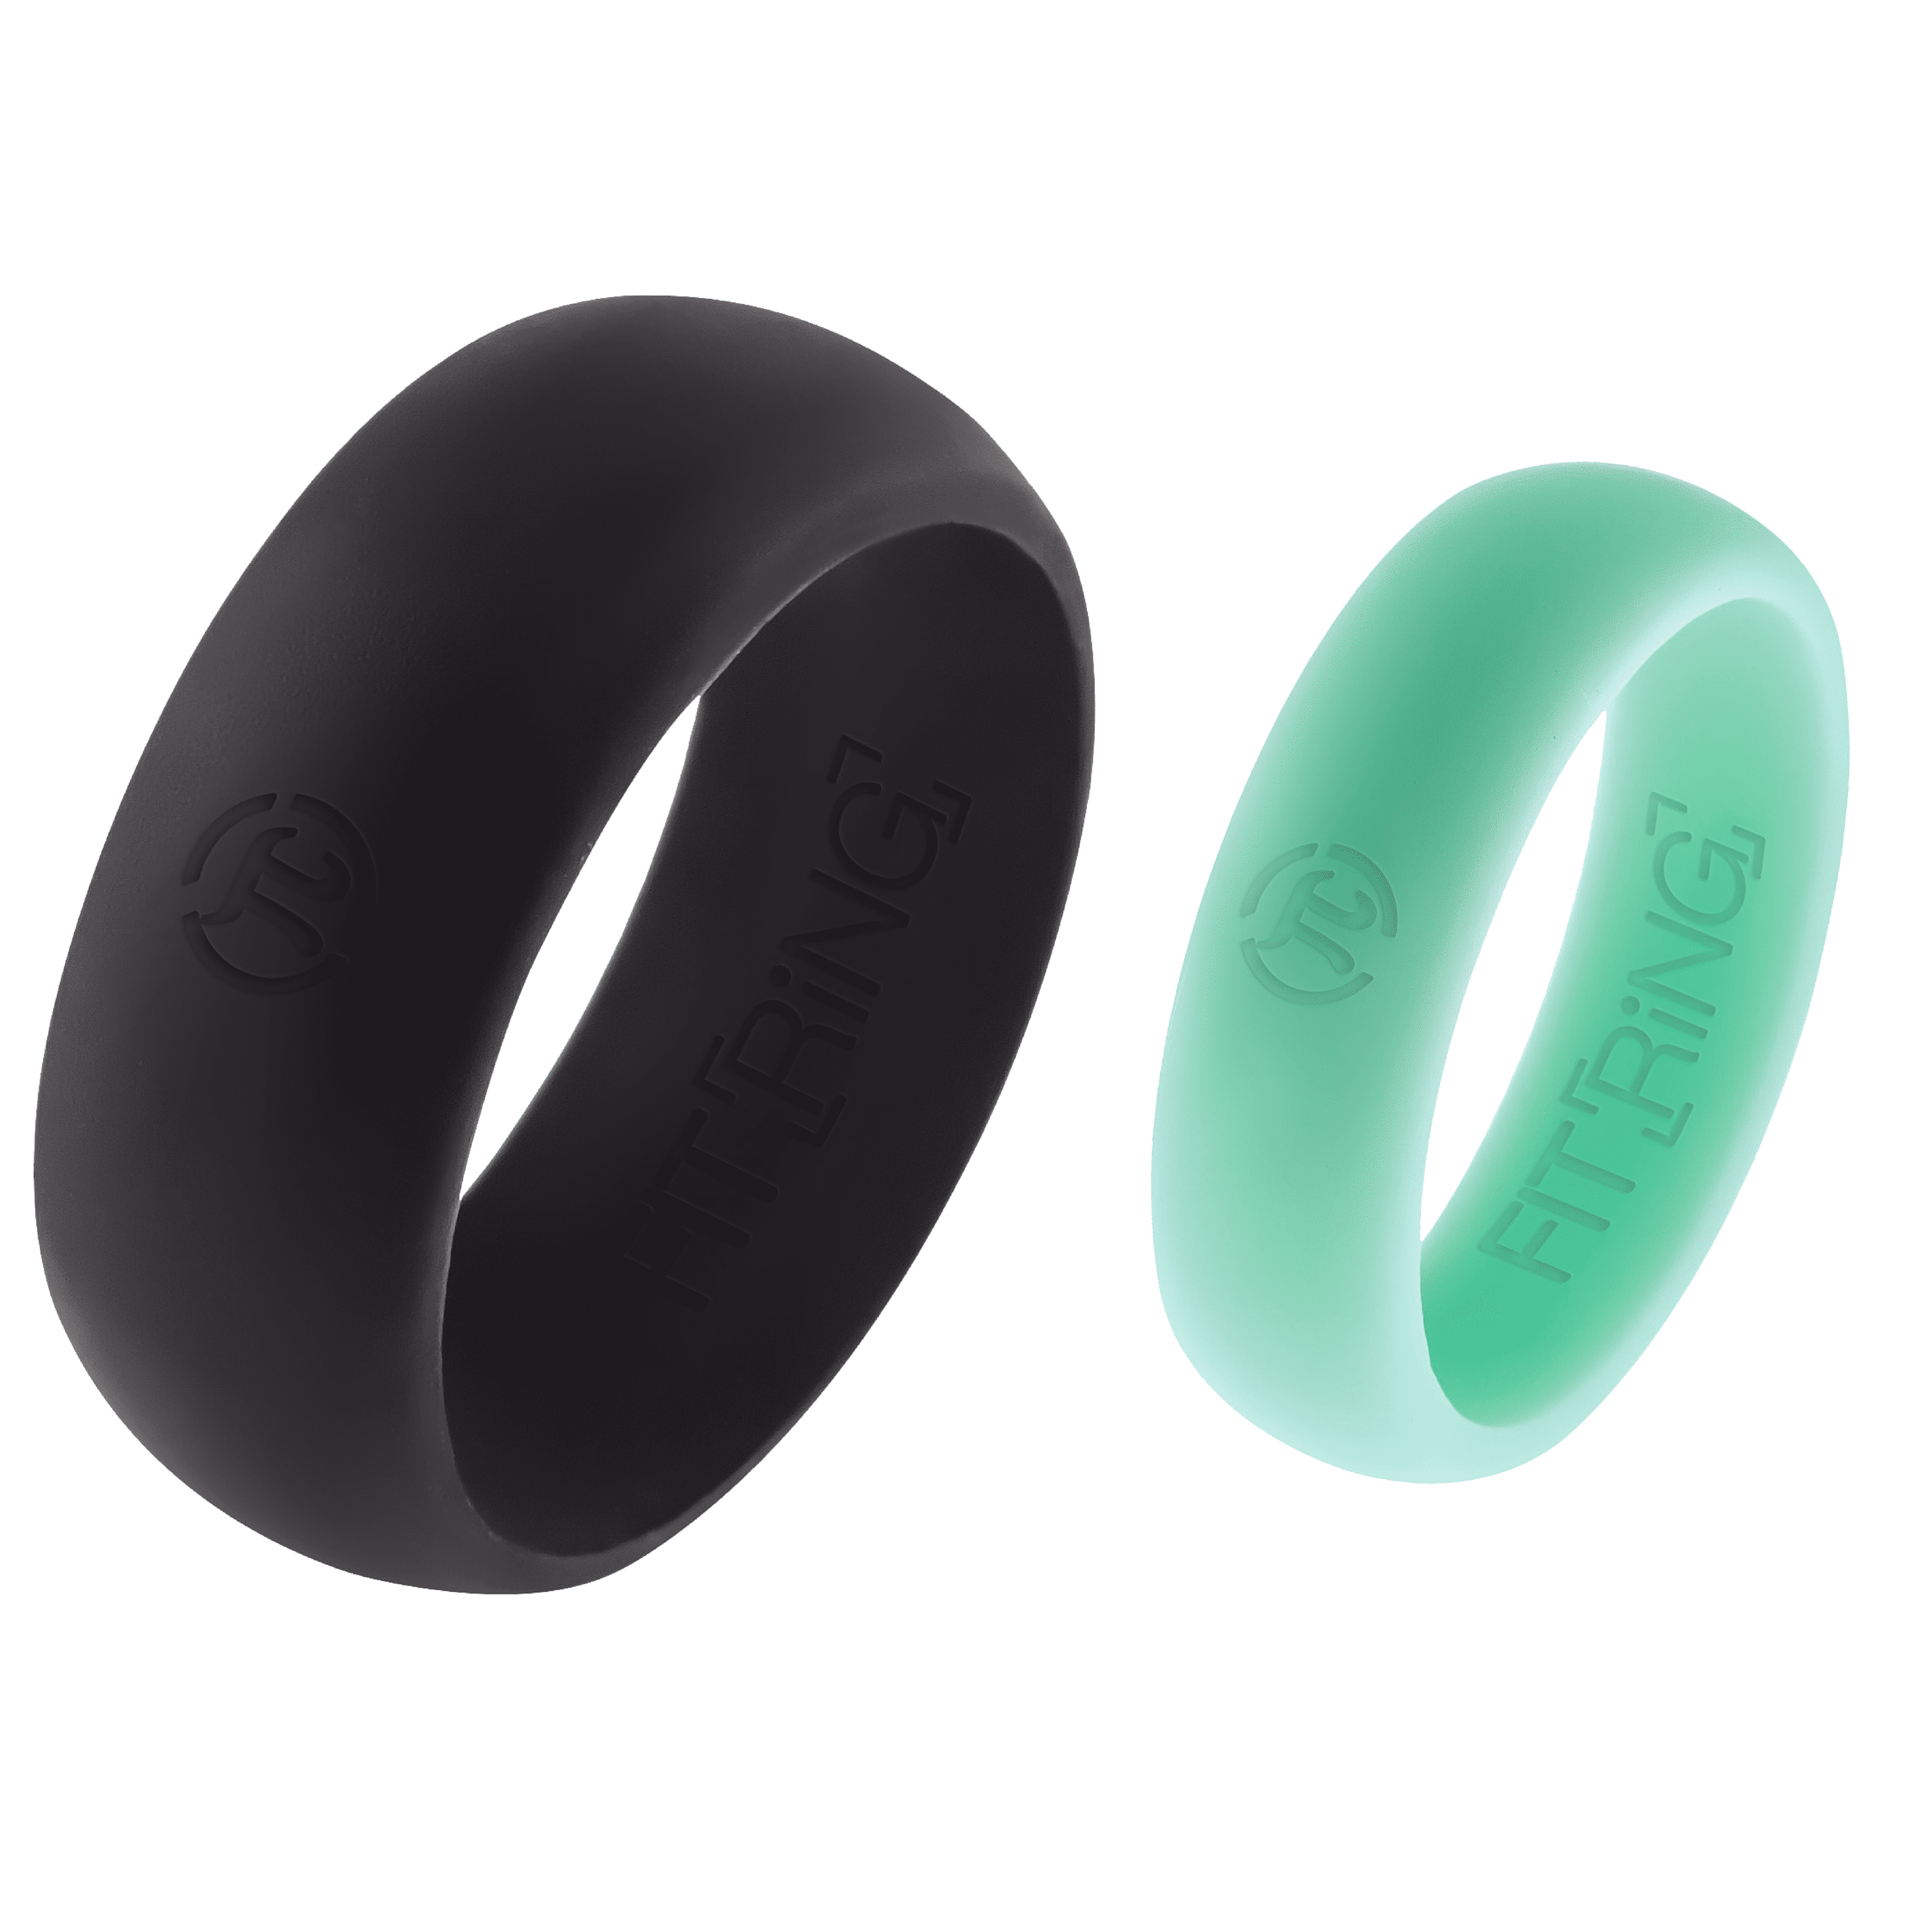 Flexible Silicone Wedding Ring in for Active Men Premium Non Bulky Medical Grade Skin Safe & Comfort Fit Band